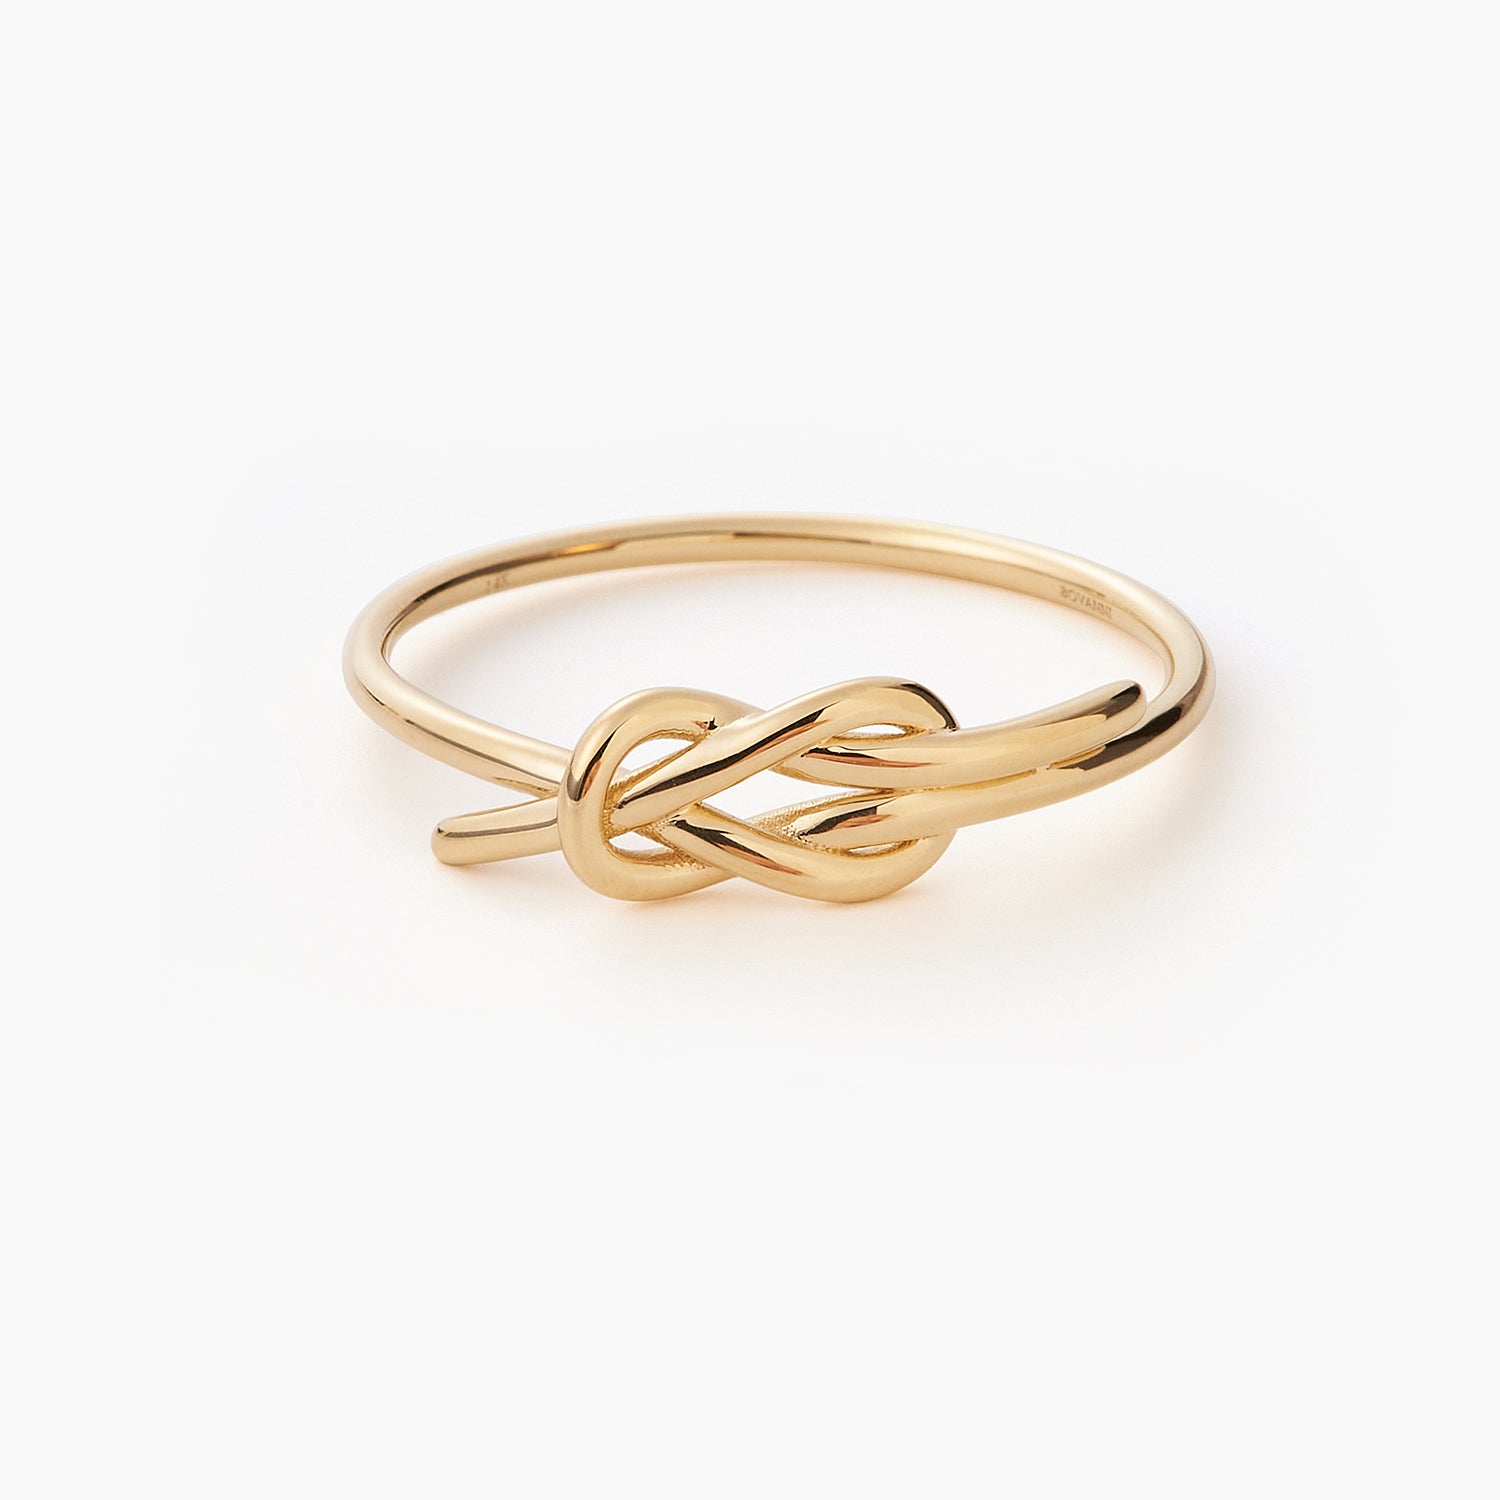 Buy 14k Solid Gold Infinity Ring, 14K Dainty Heart Detailed Ring,  Minimalist Real Ring, Heart Ring for Women, Valentine's Day Gift, Gift for  Her Online in India - Etsy